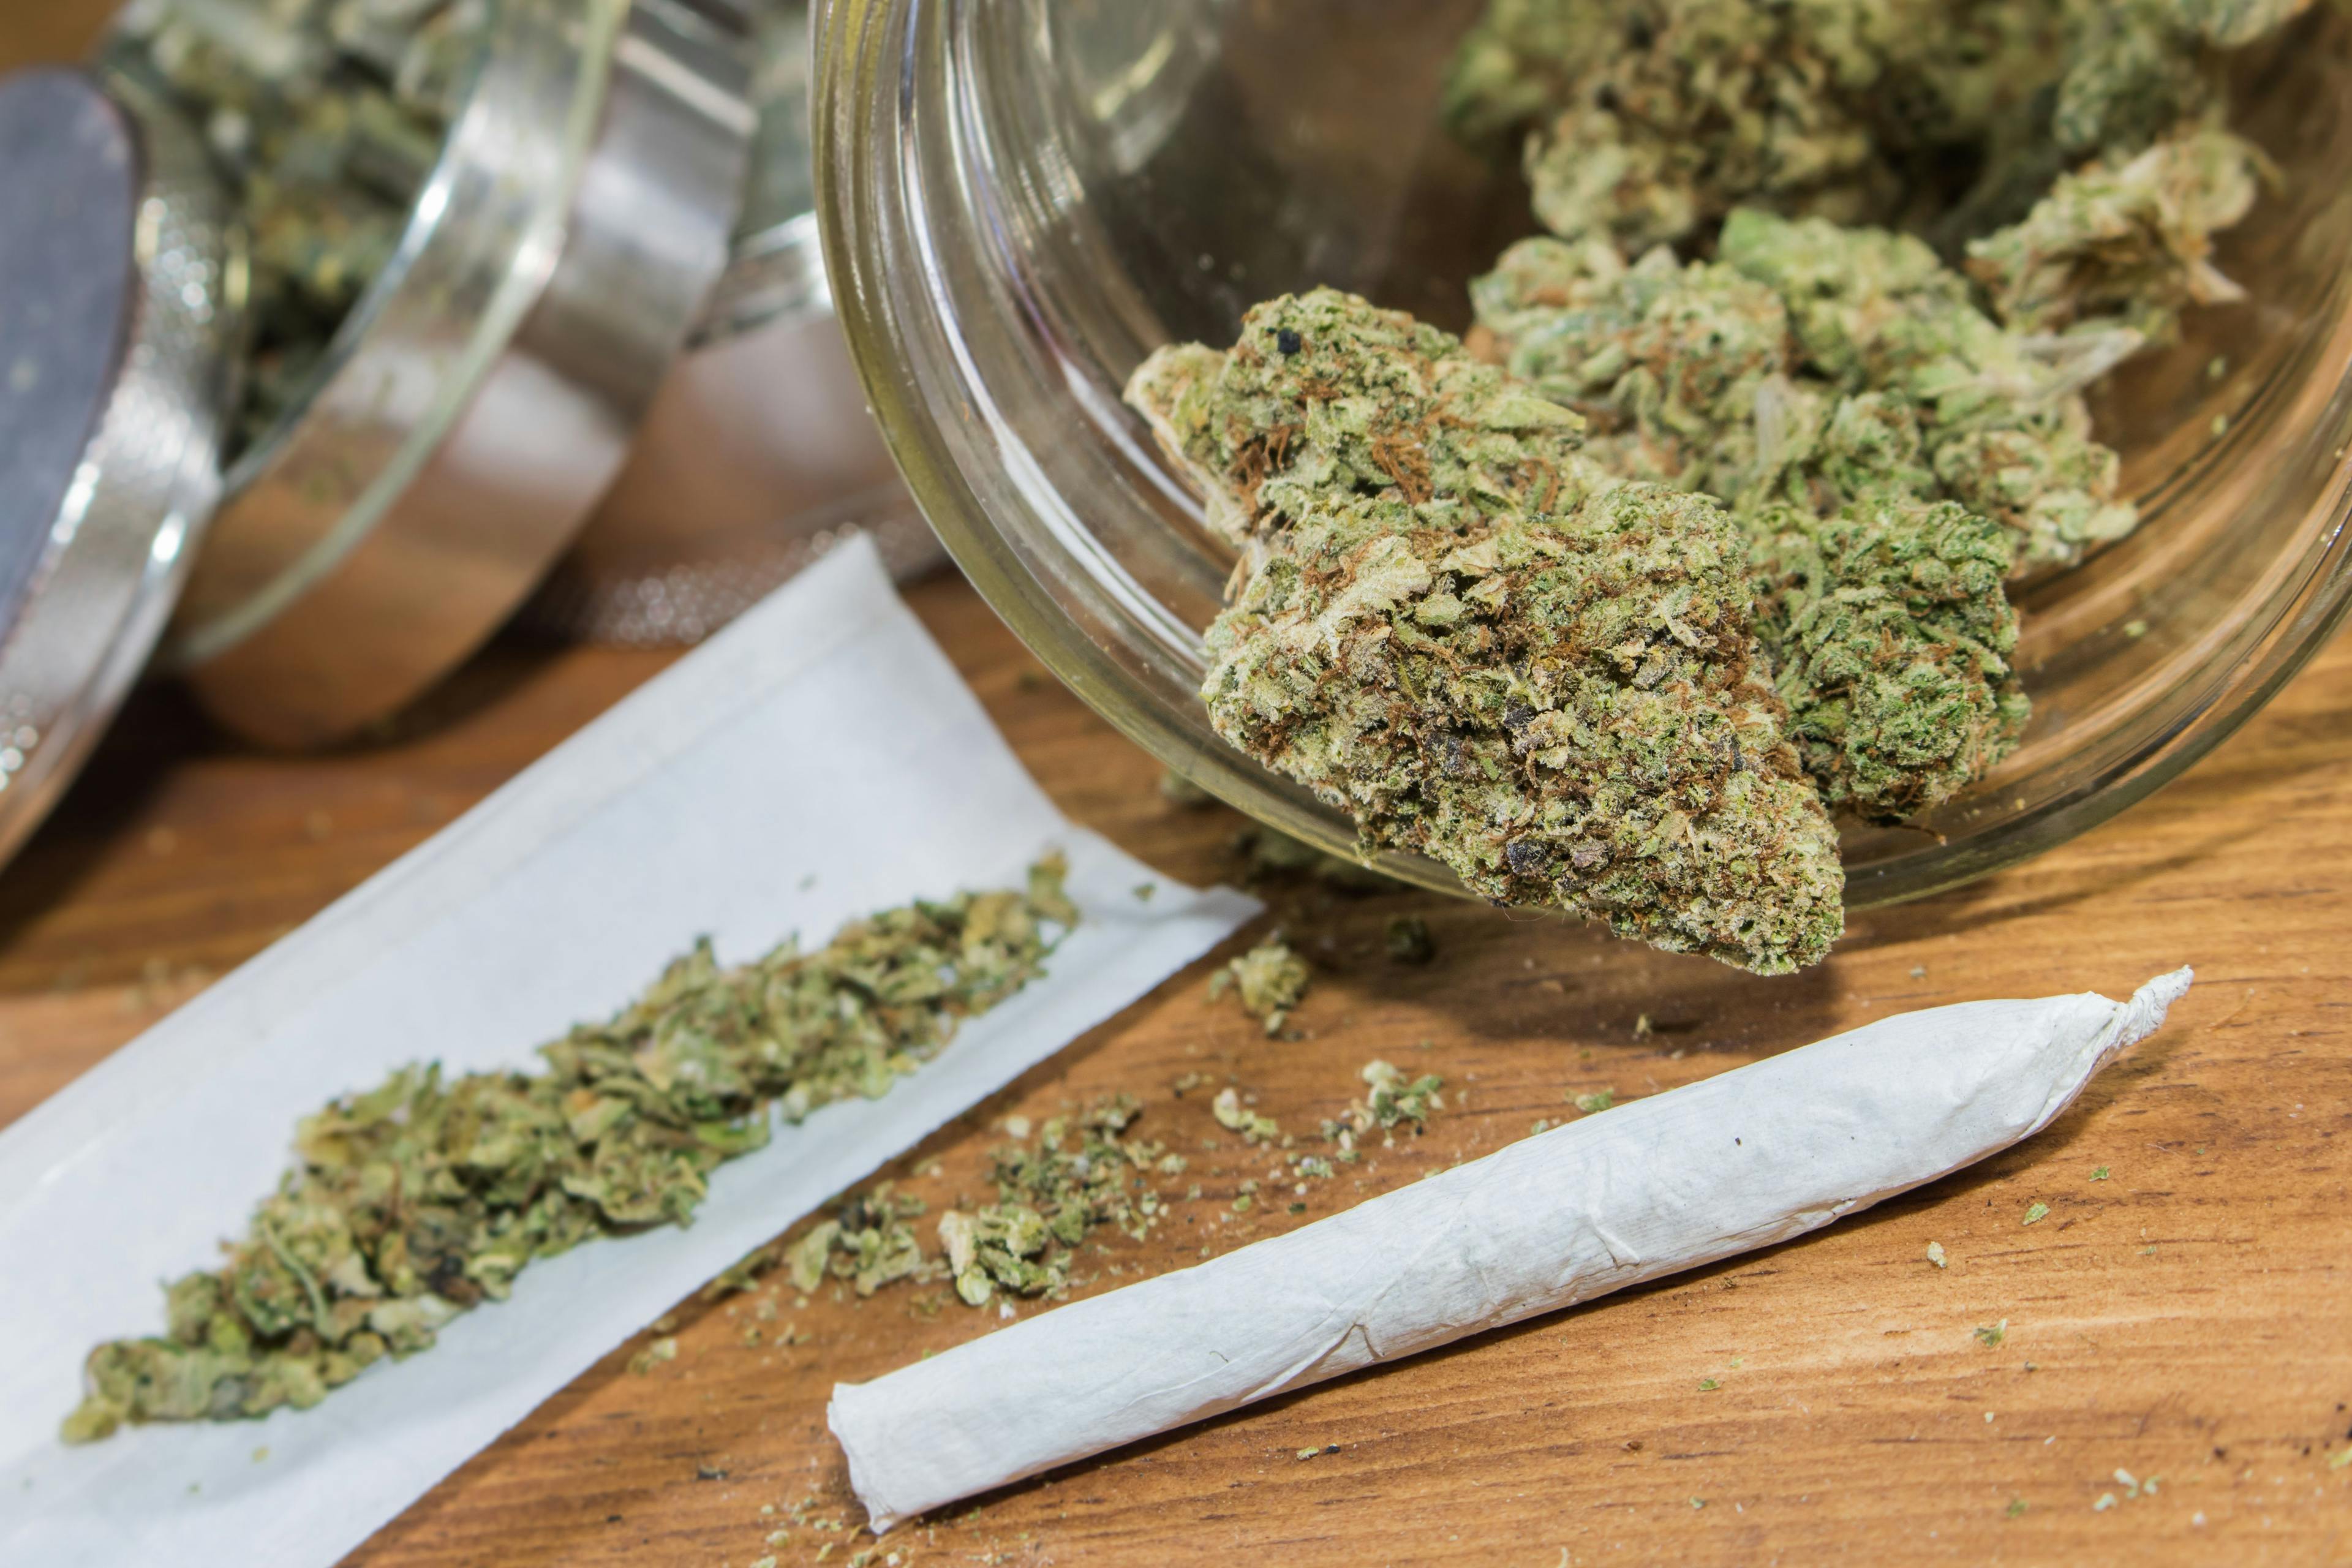 Smoking Cannabis Linked With Higher Risk of Cardiovascular Disease